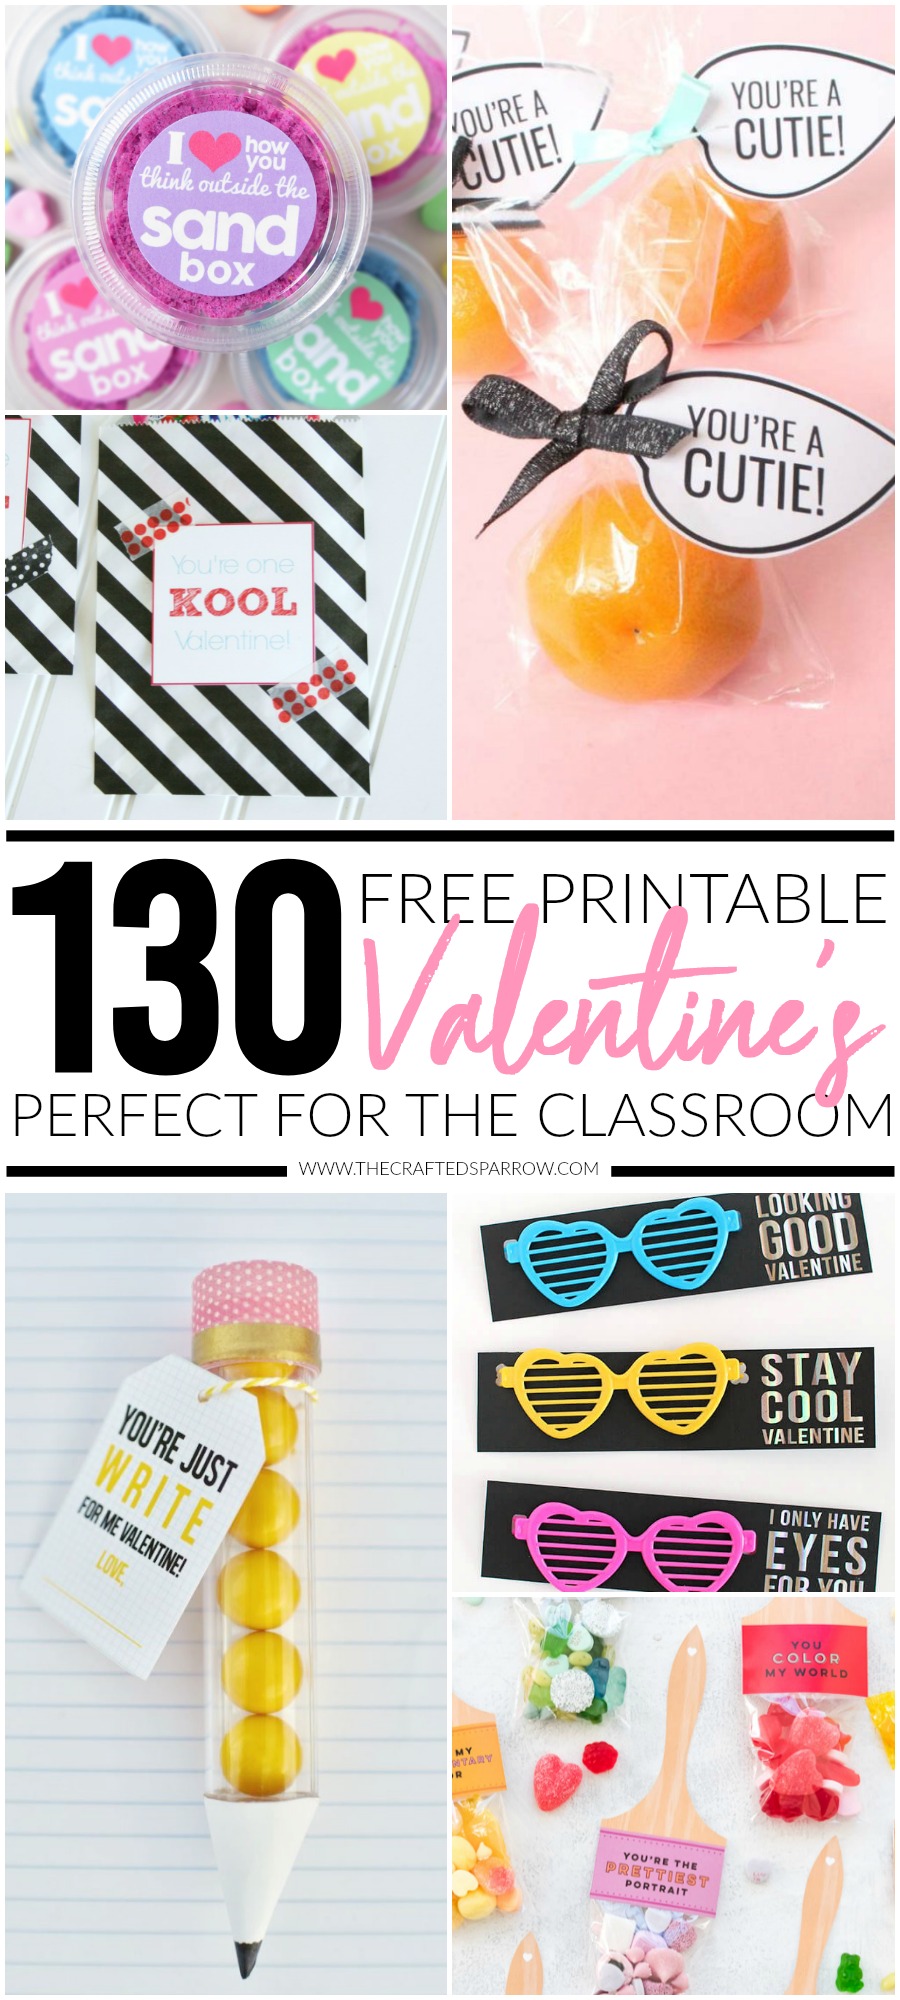 https://www.thecraftedsparrow.com/wp-content/uploads/2019/01/130-Free-Printable-Valentines-for-The-Classroom.jpg